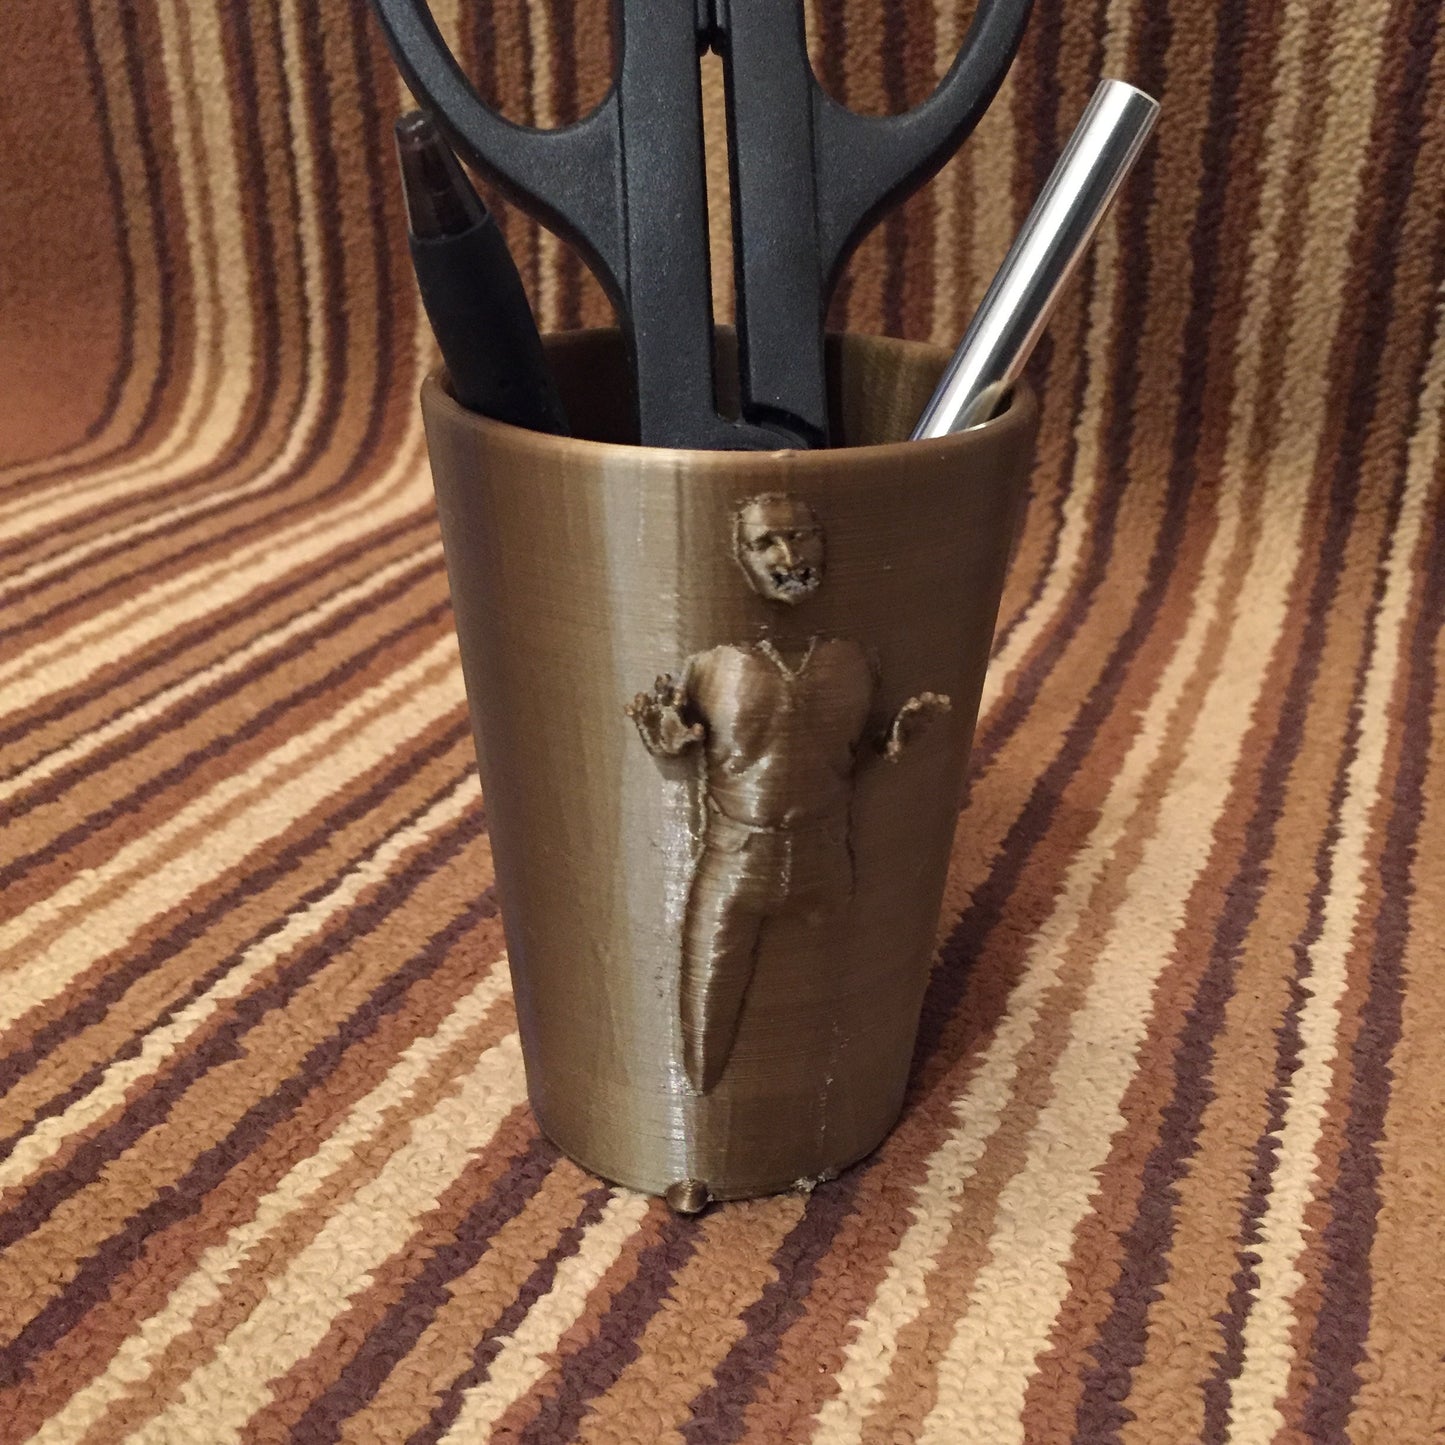 Star Wars Han Solo / Pencil Holder Cup / Planter / Plant Pot / Star Wars Gift